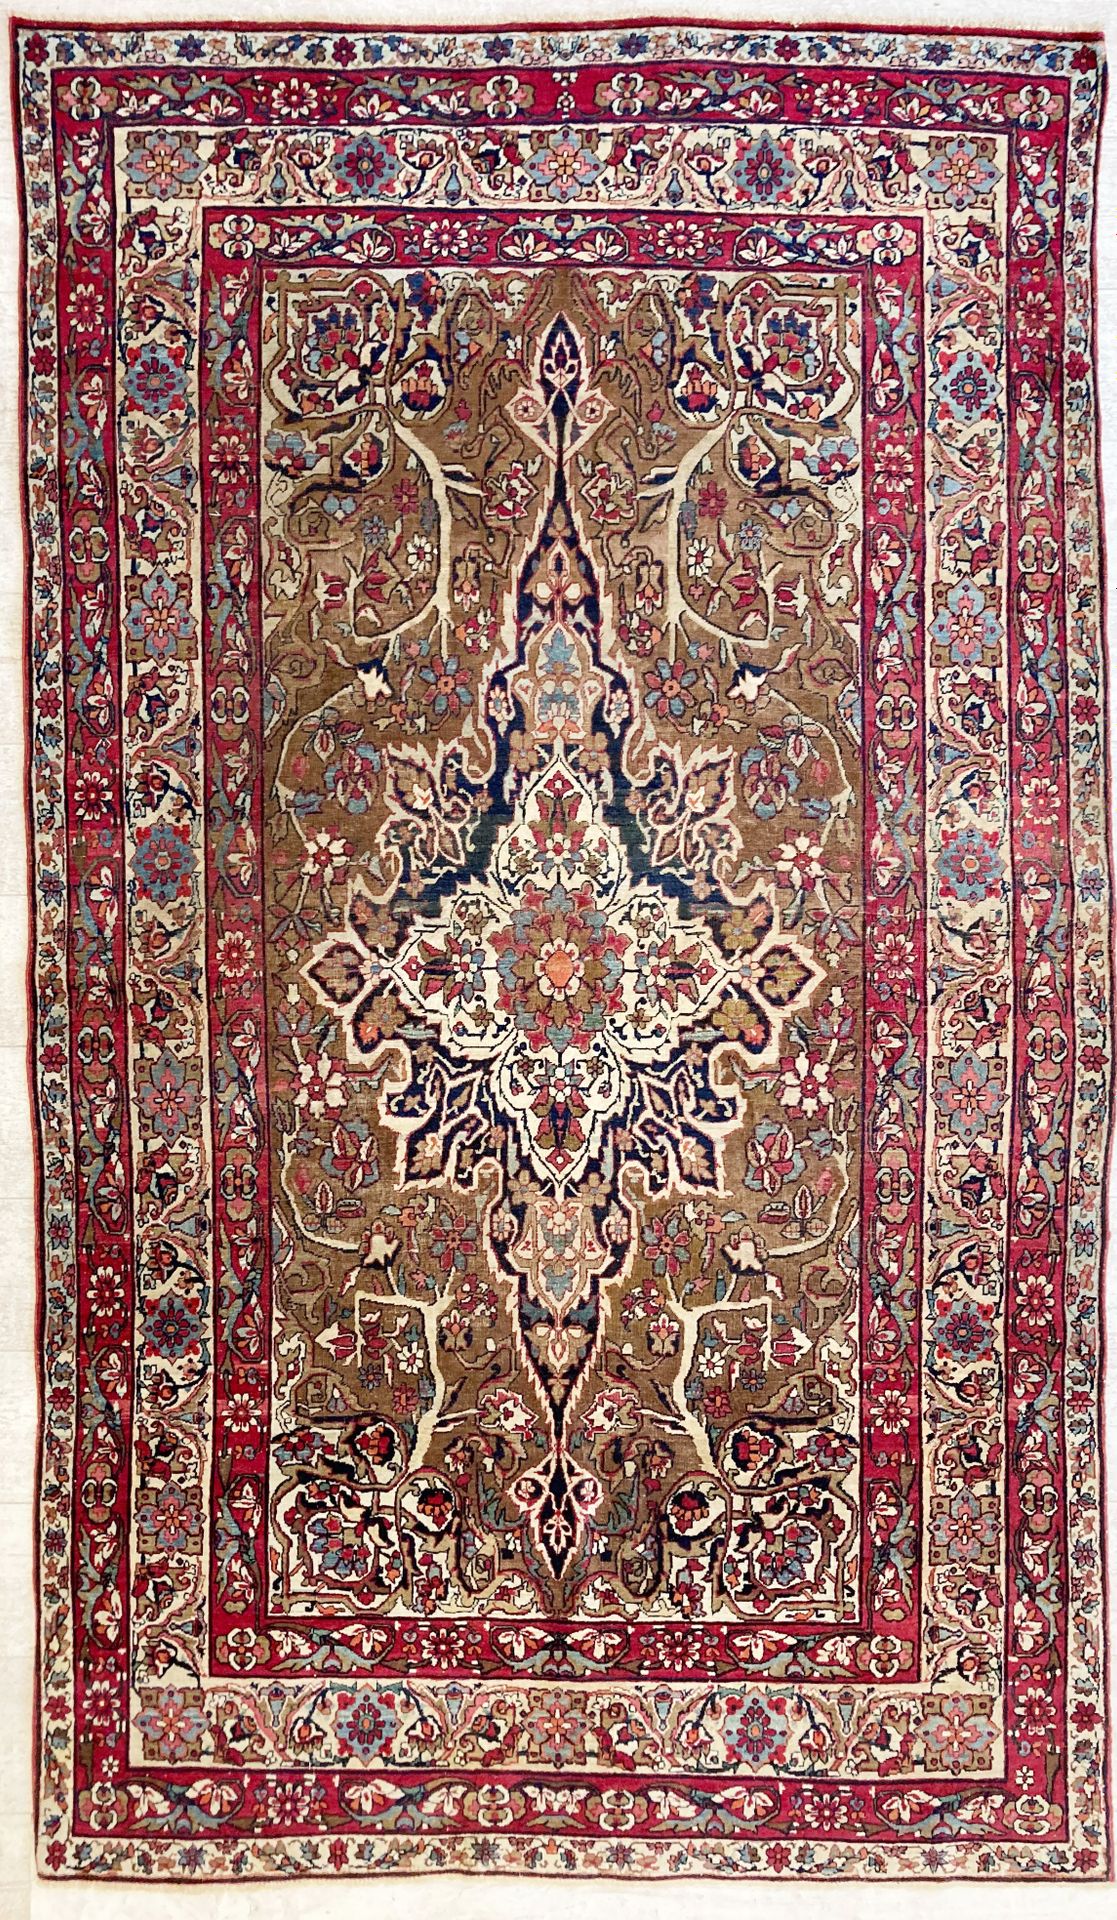 Null Persian wool carpet decorated with a central medallion with flowers and fou&hellip;